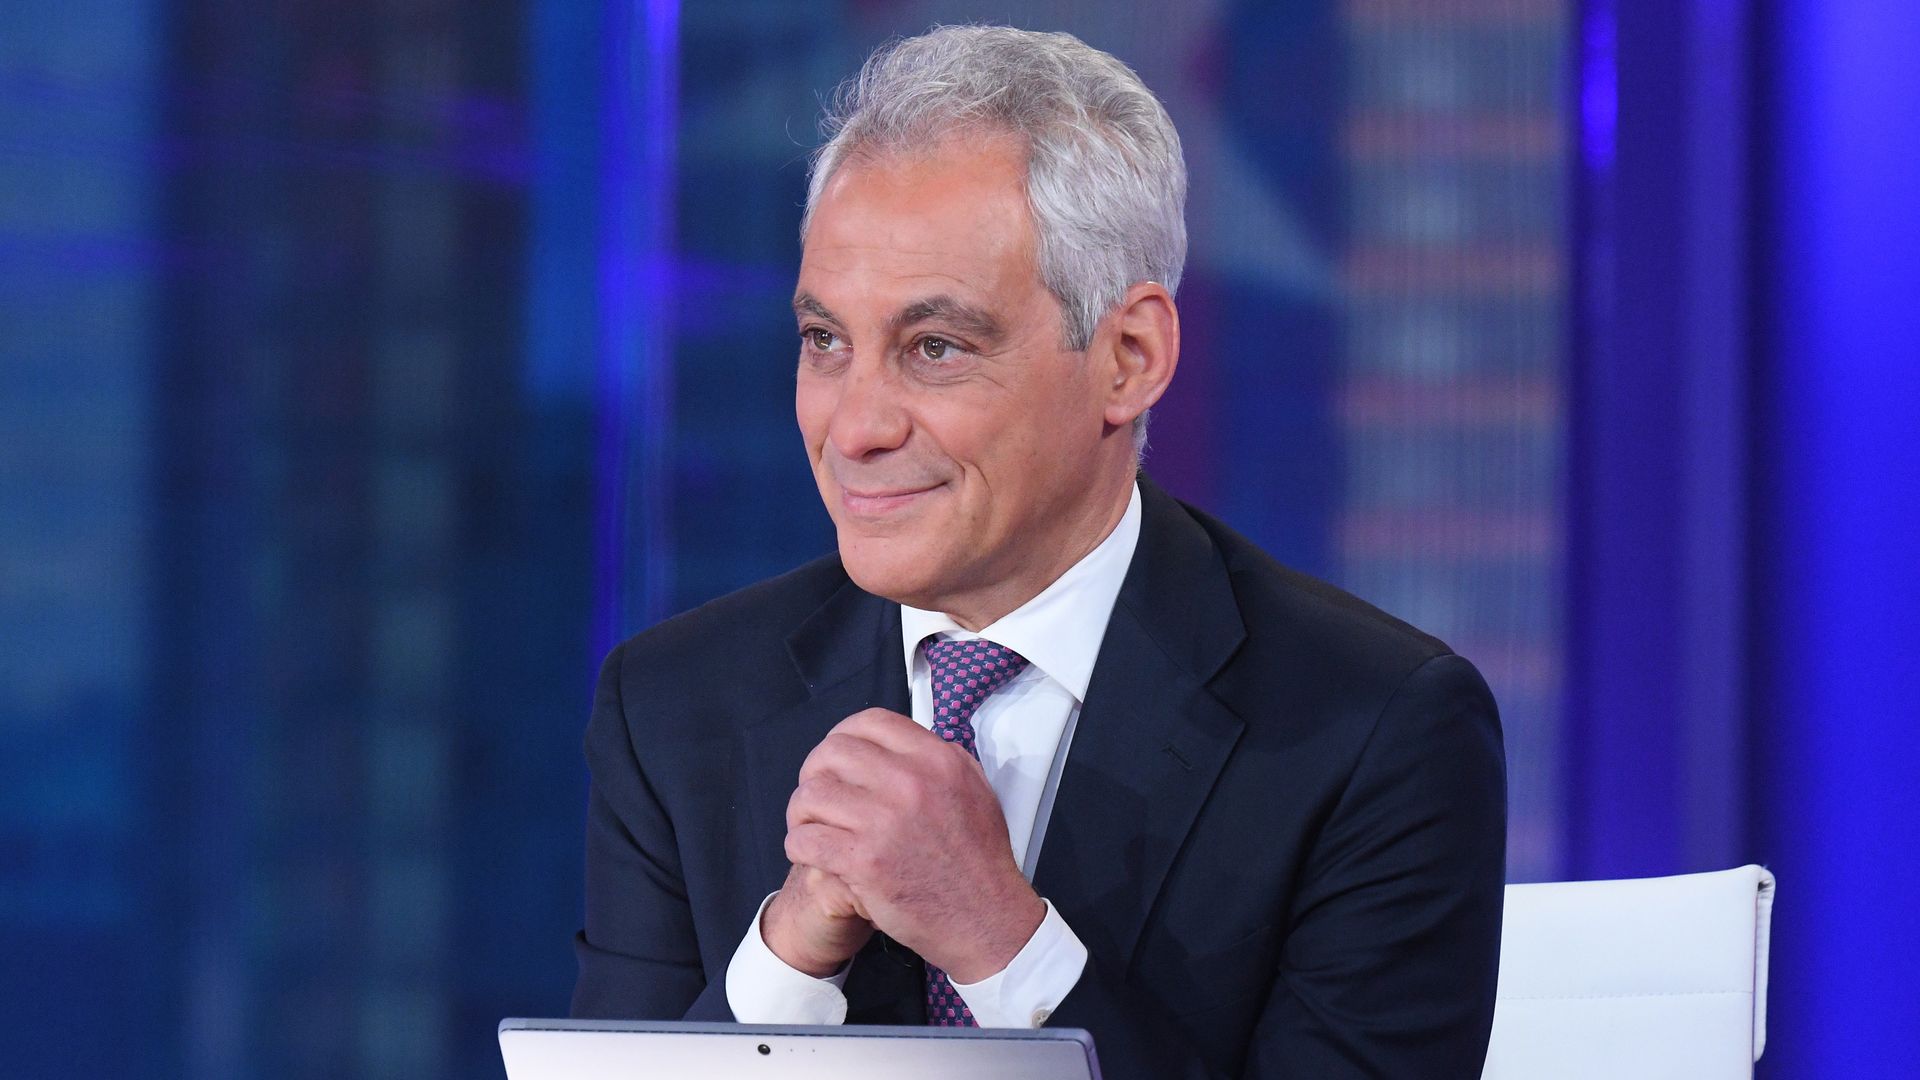 Rahm Emanuel is seen while providing political analysis for ABC News.